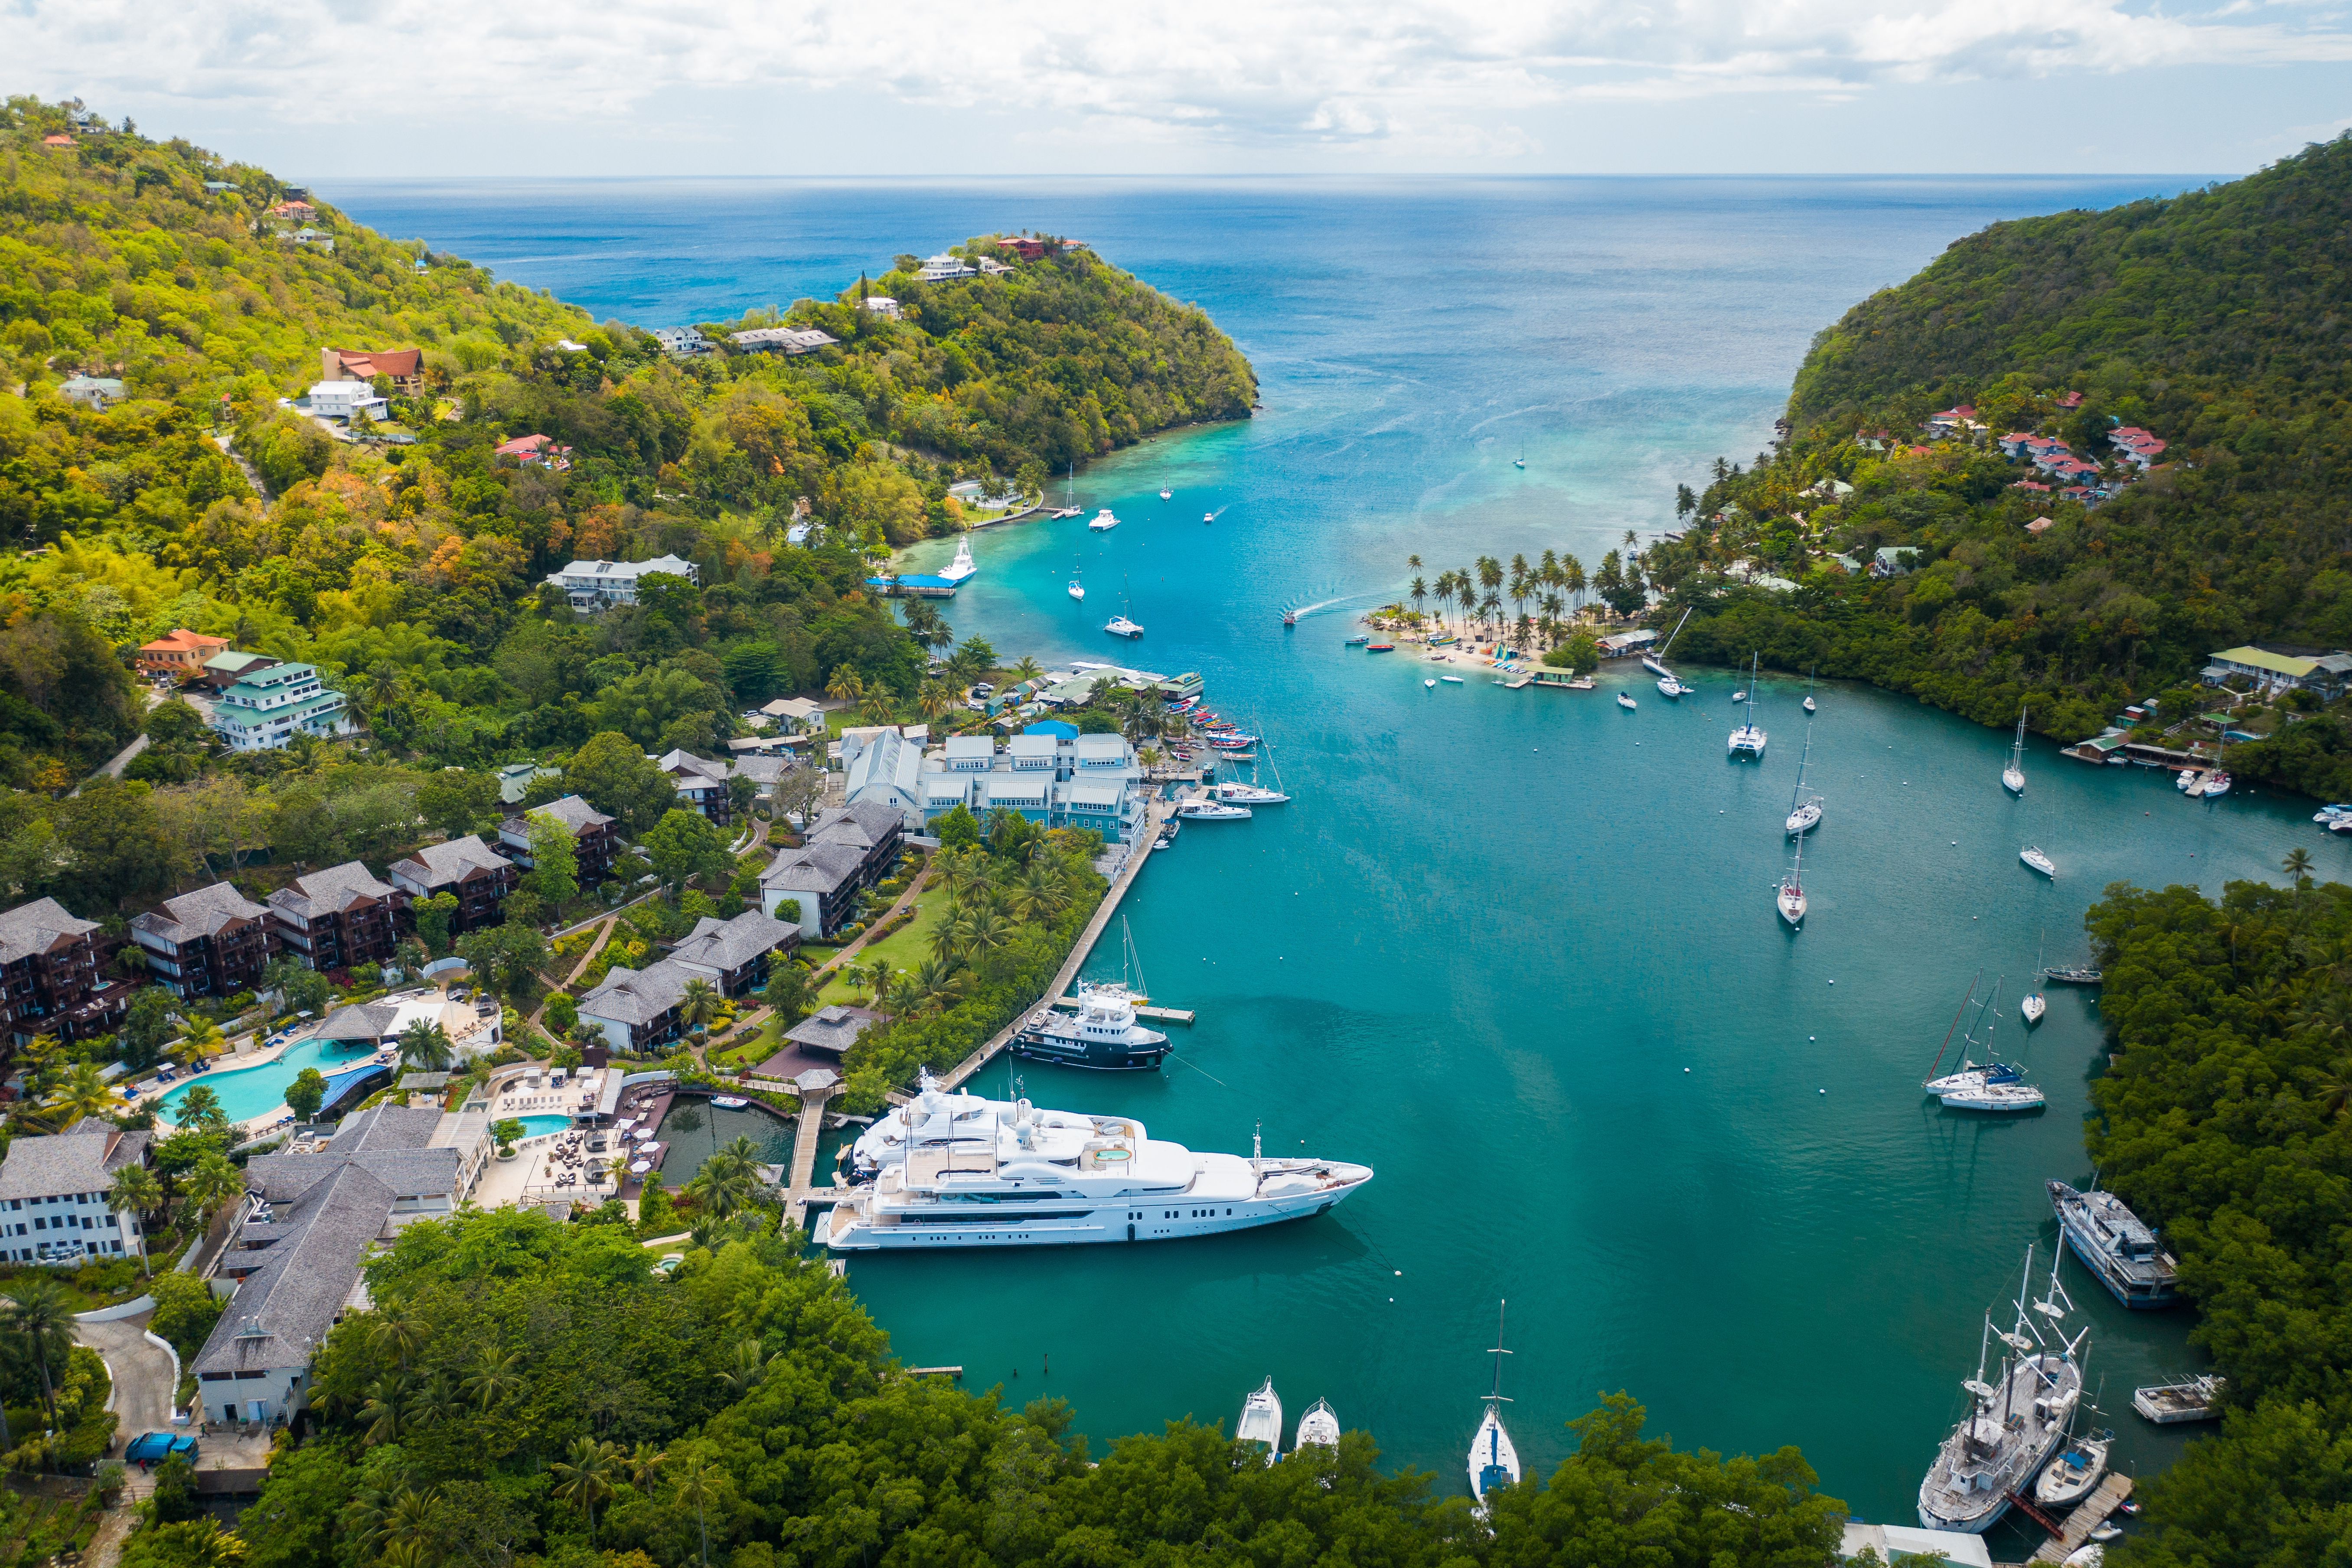 St. Lucia citizenship allows foreigners to live in Caribbean islands